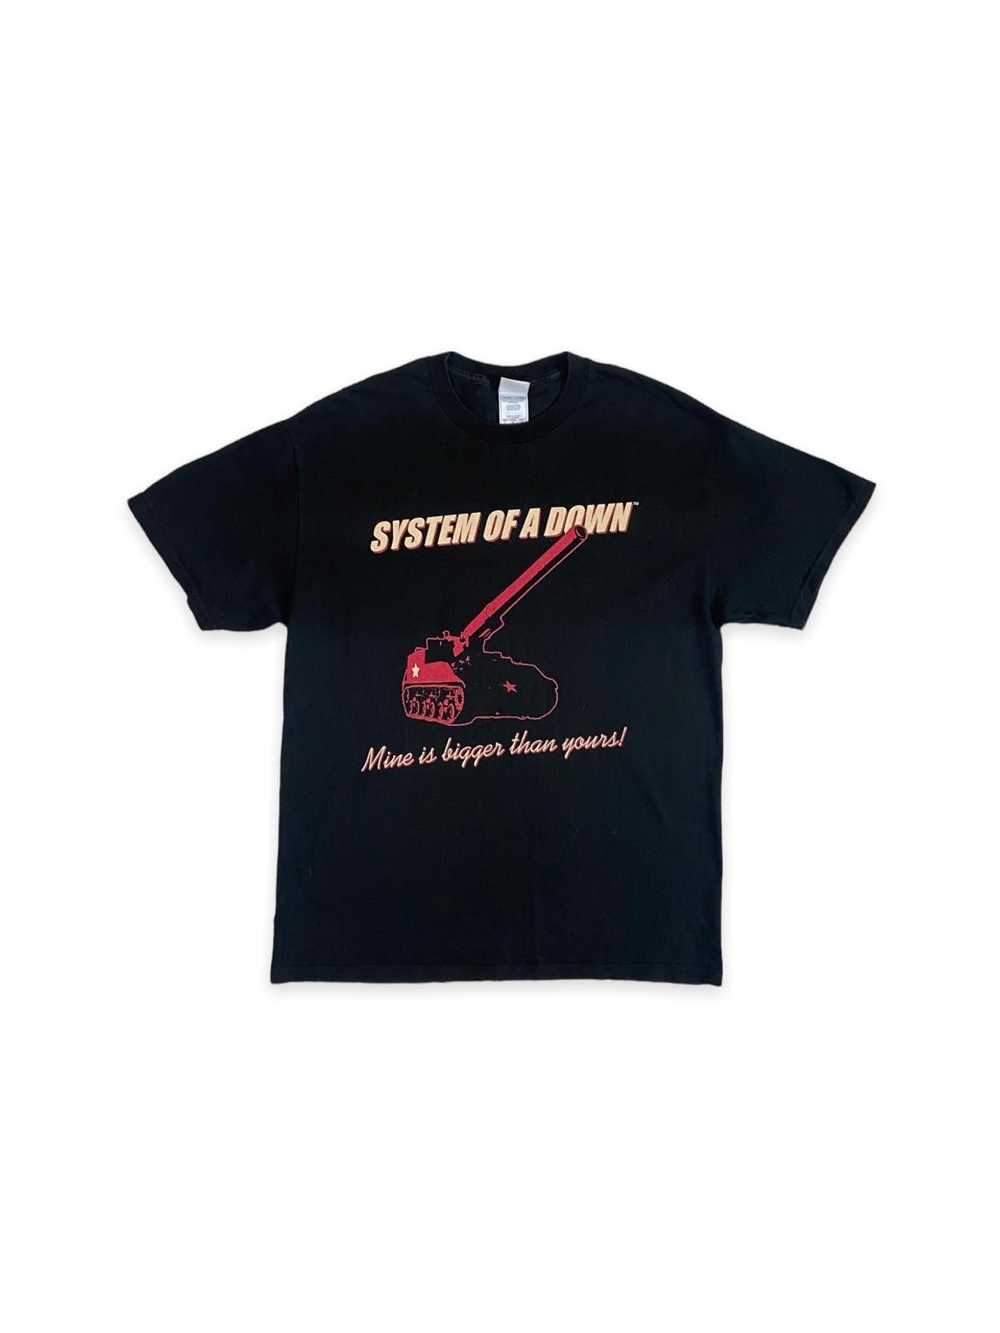 Band Tees × Very Rare × Vintage VINTAGE 00’s SYST… - image 1